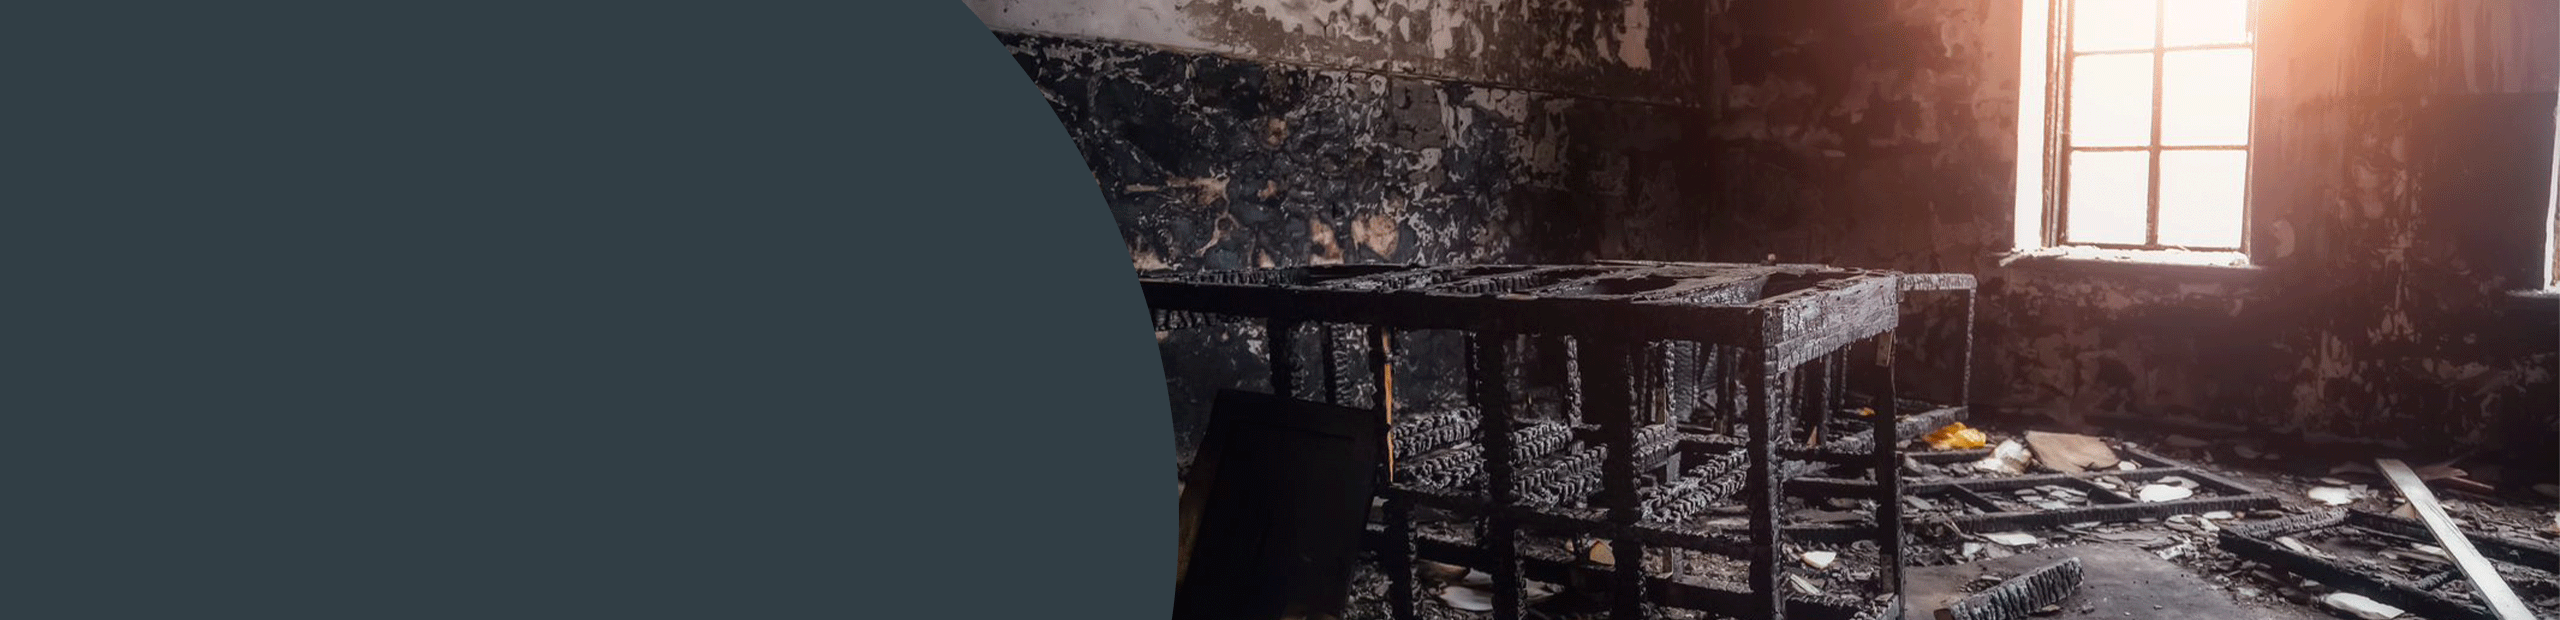 Fire Damage Cleaning Services - Buckinghamshire